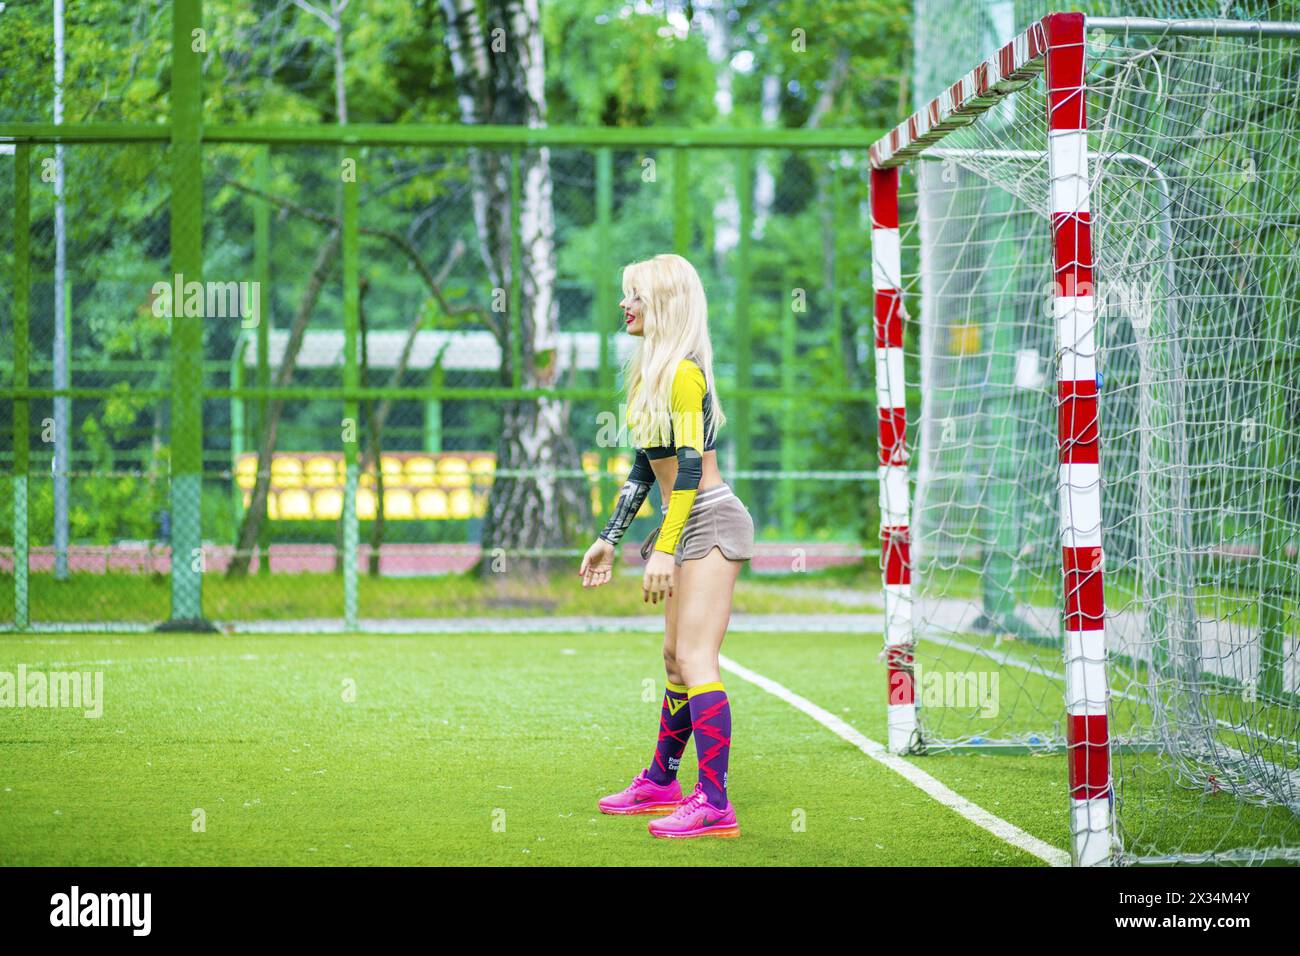 MOSCOW - JUL 16, 2015: beautiful woman (with model release) in top stands at football field at gate Stock Photo